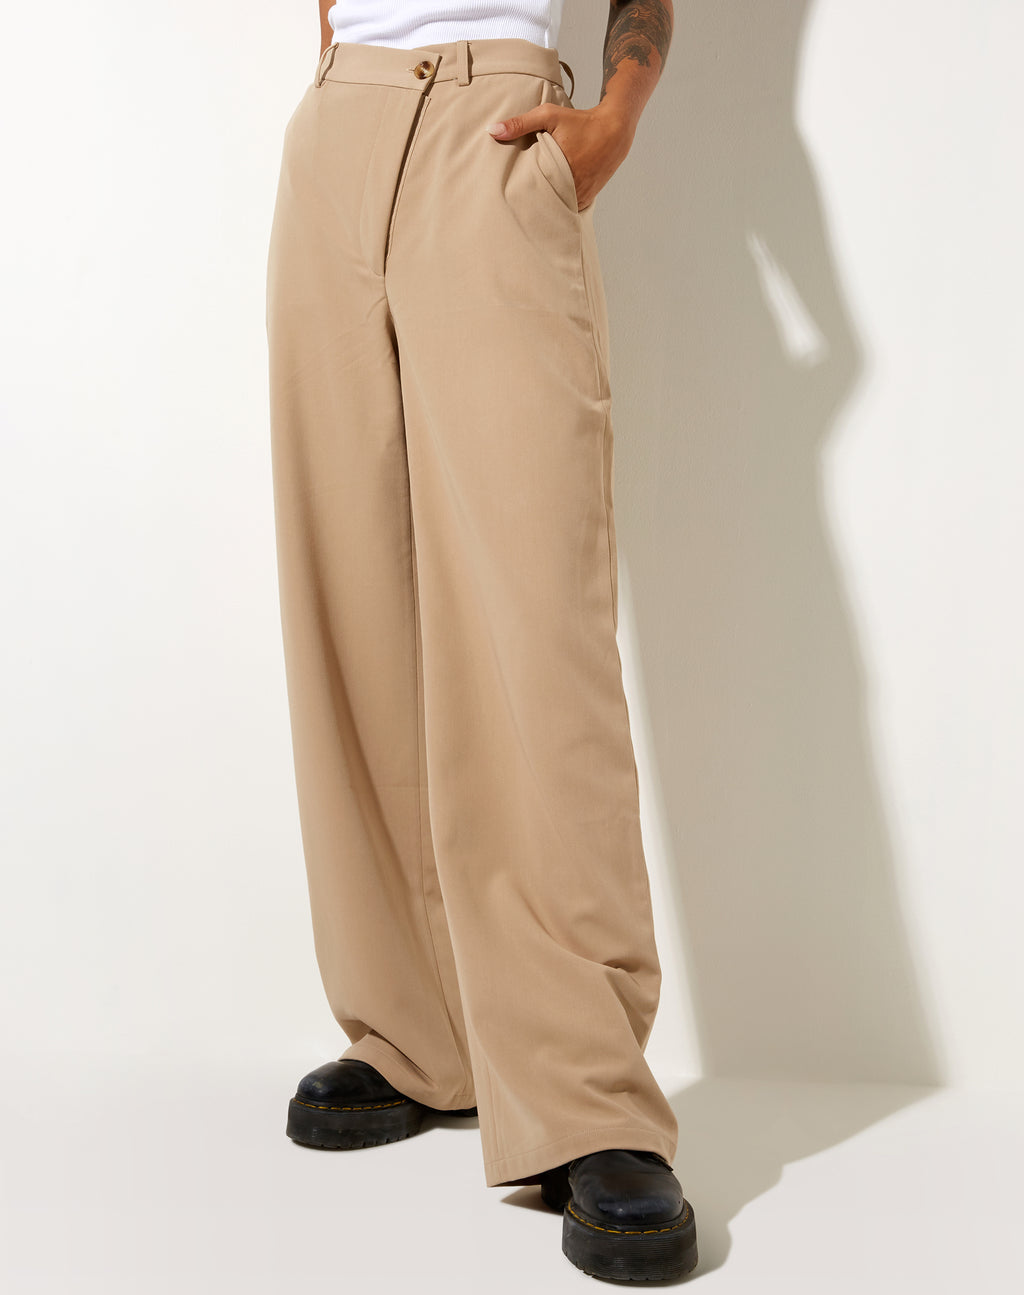 Corby Trouser in Tailoring Tan